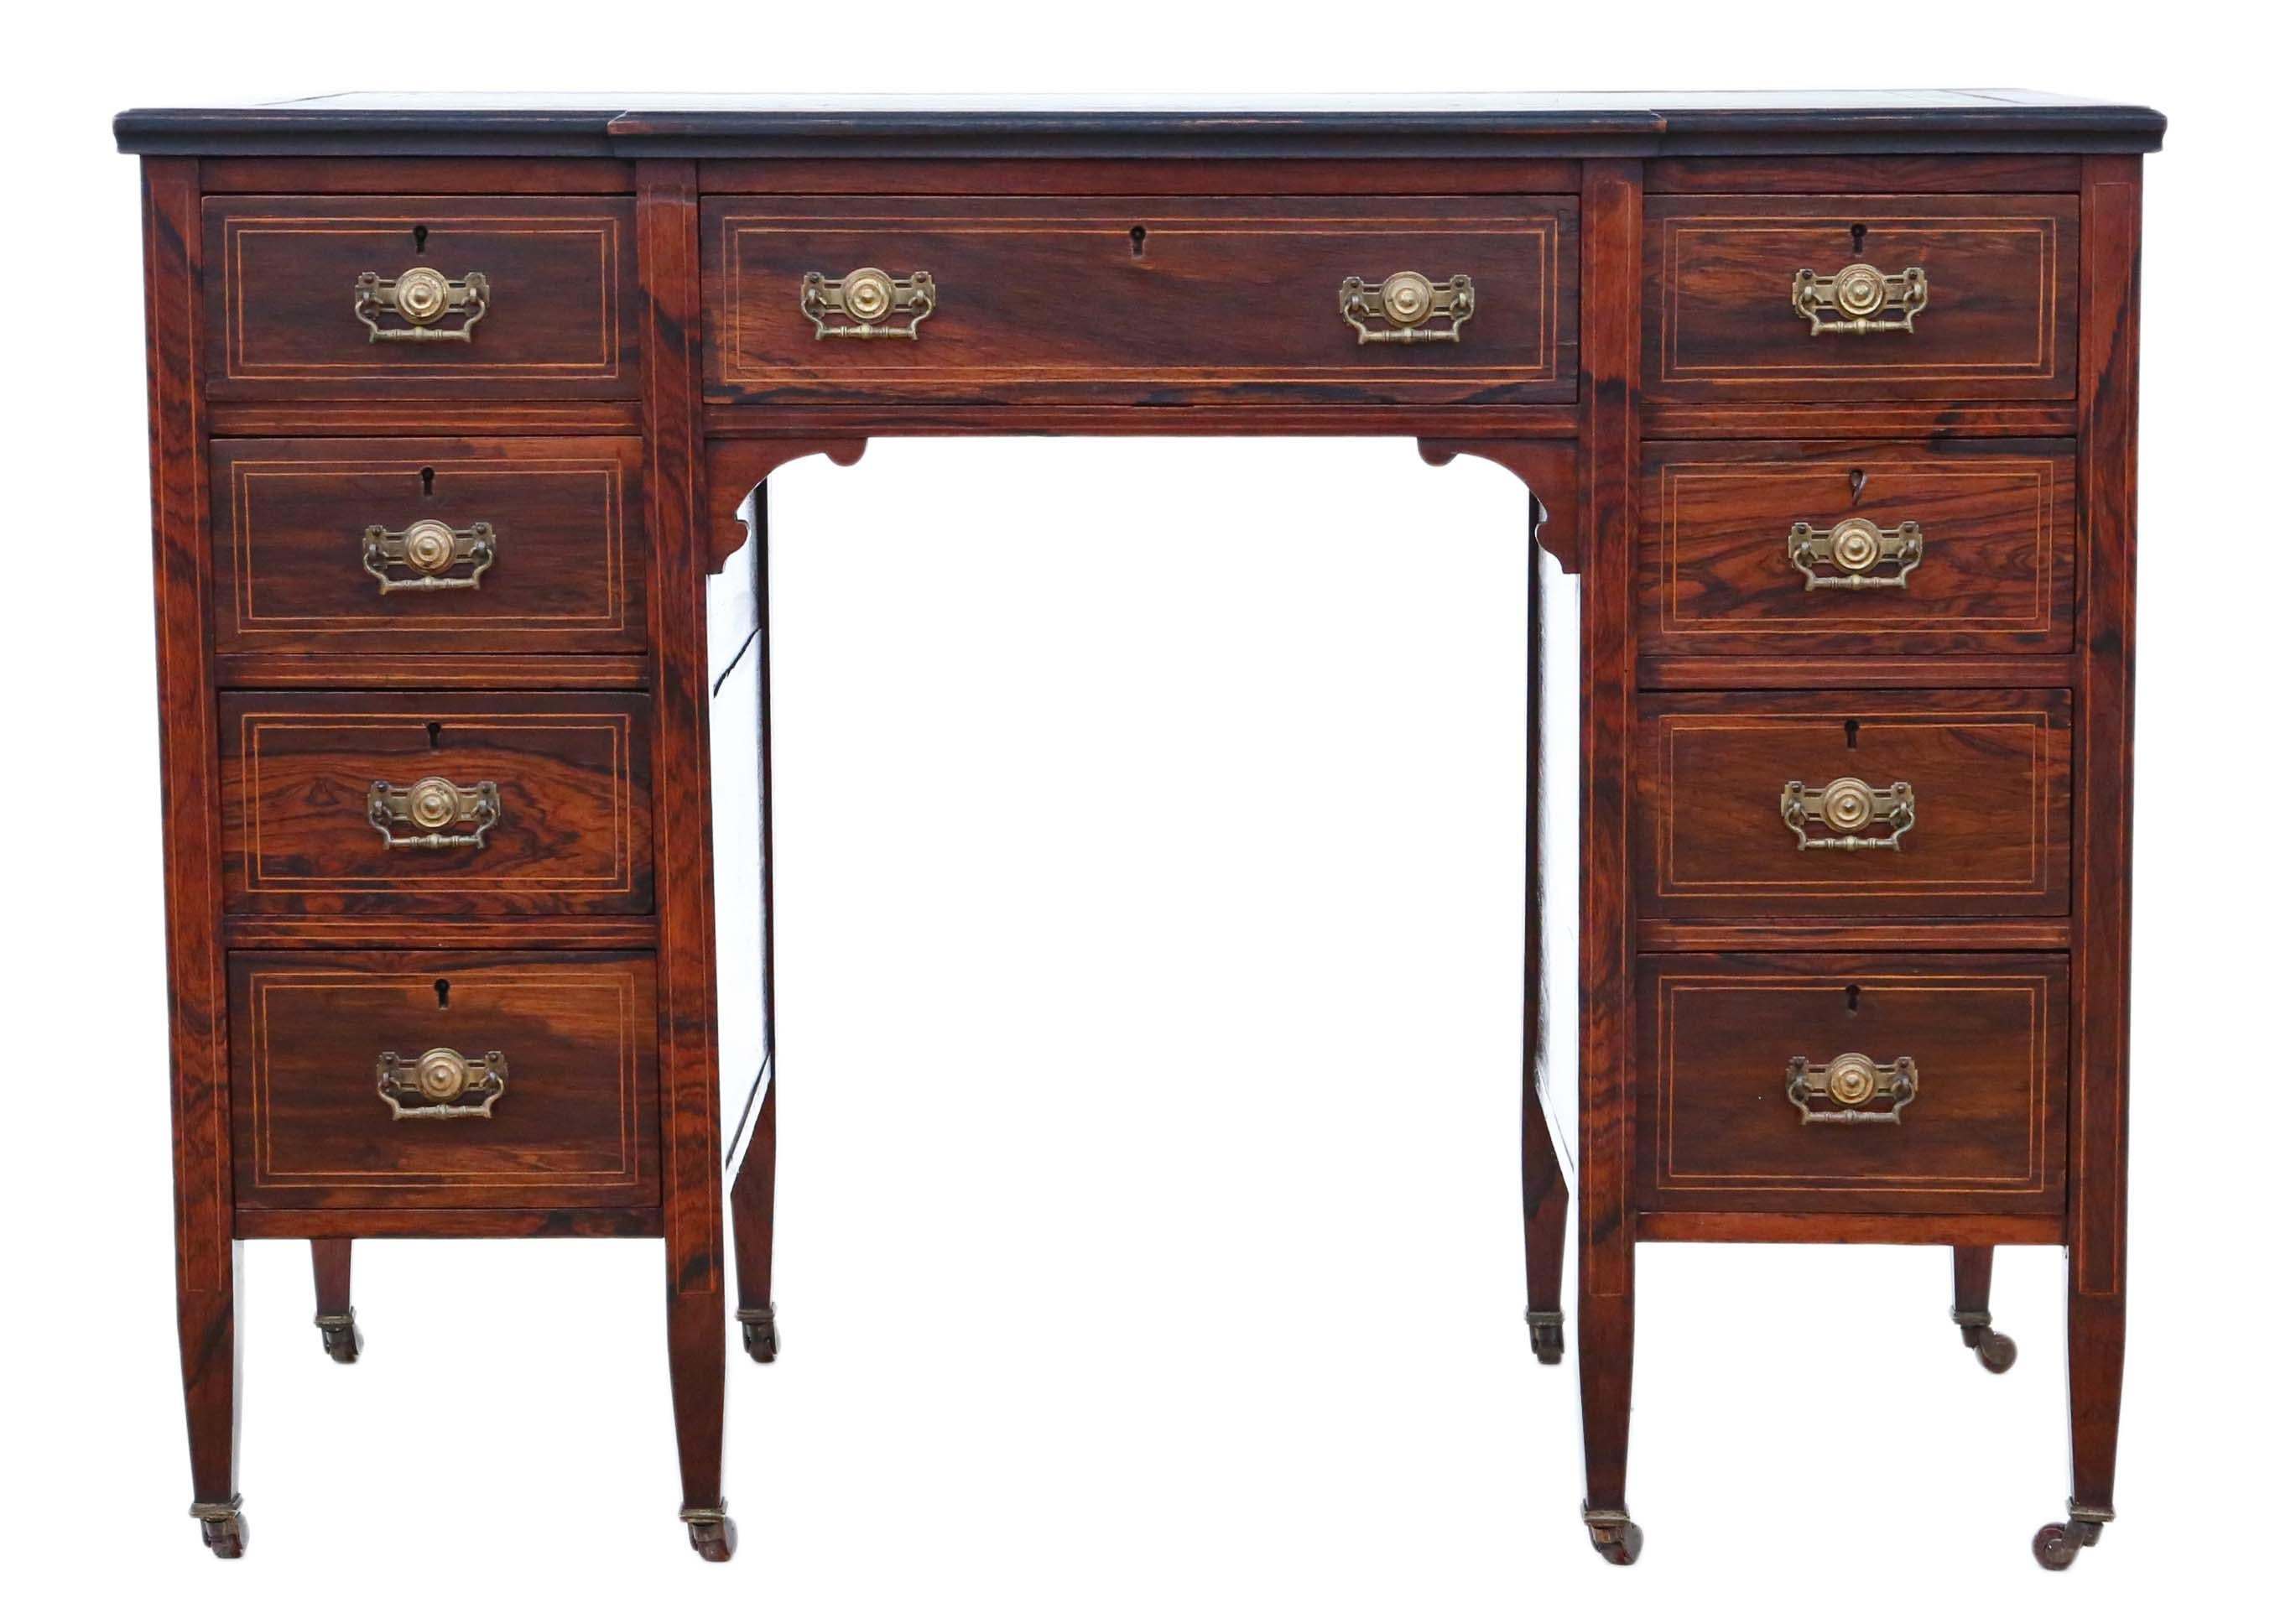 Antique fine quality small Victorian inlaid rosewood desk, writing or dressing table, circa 1880.
This is a lovely quality piece, that is full of age, charm and character. Patinated tooled leather top.
Solid with no loose joints... a very rare